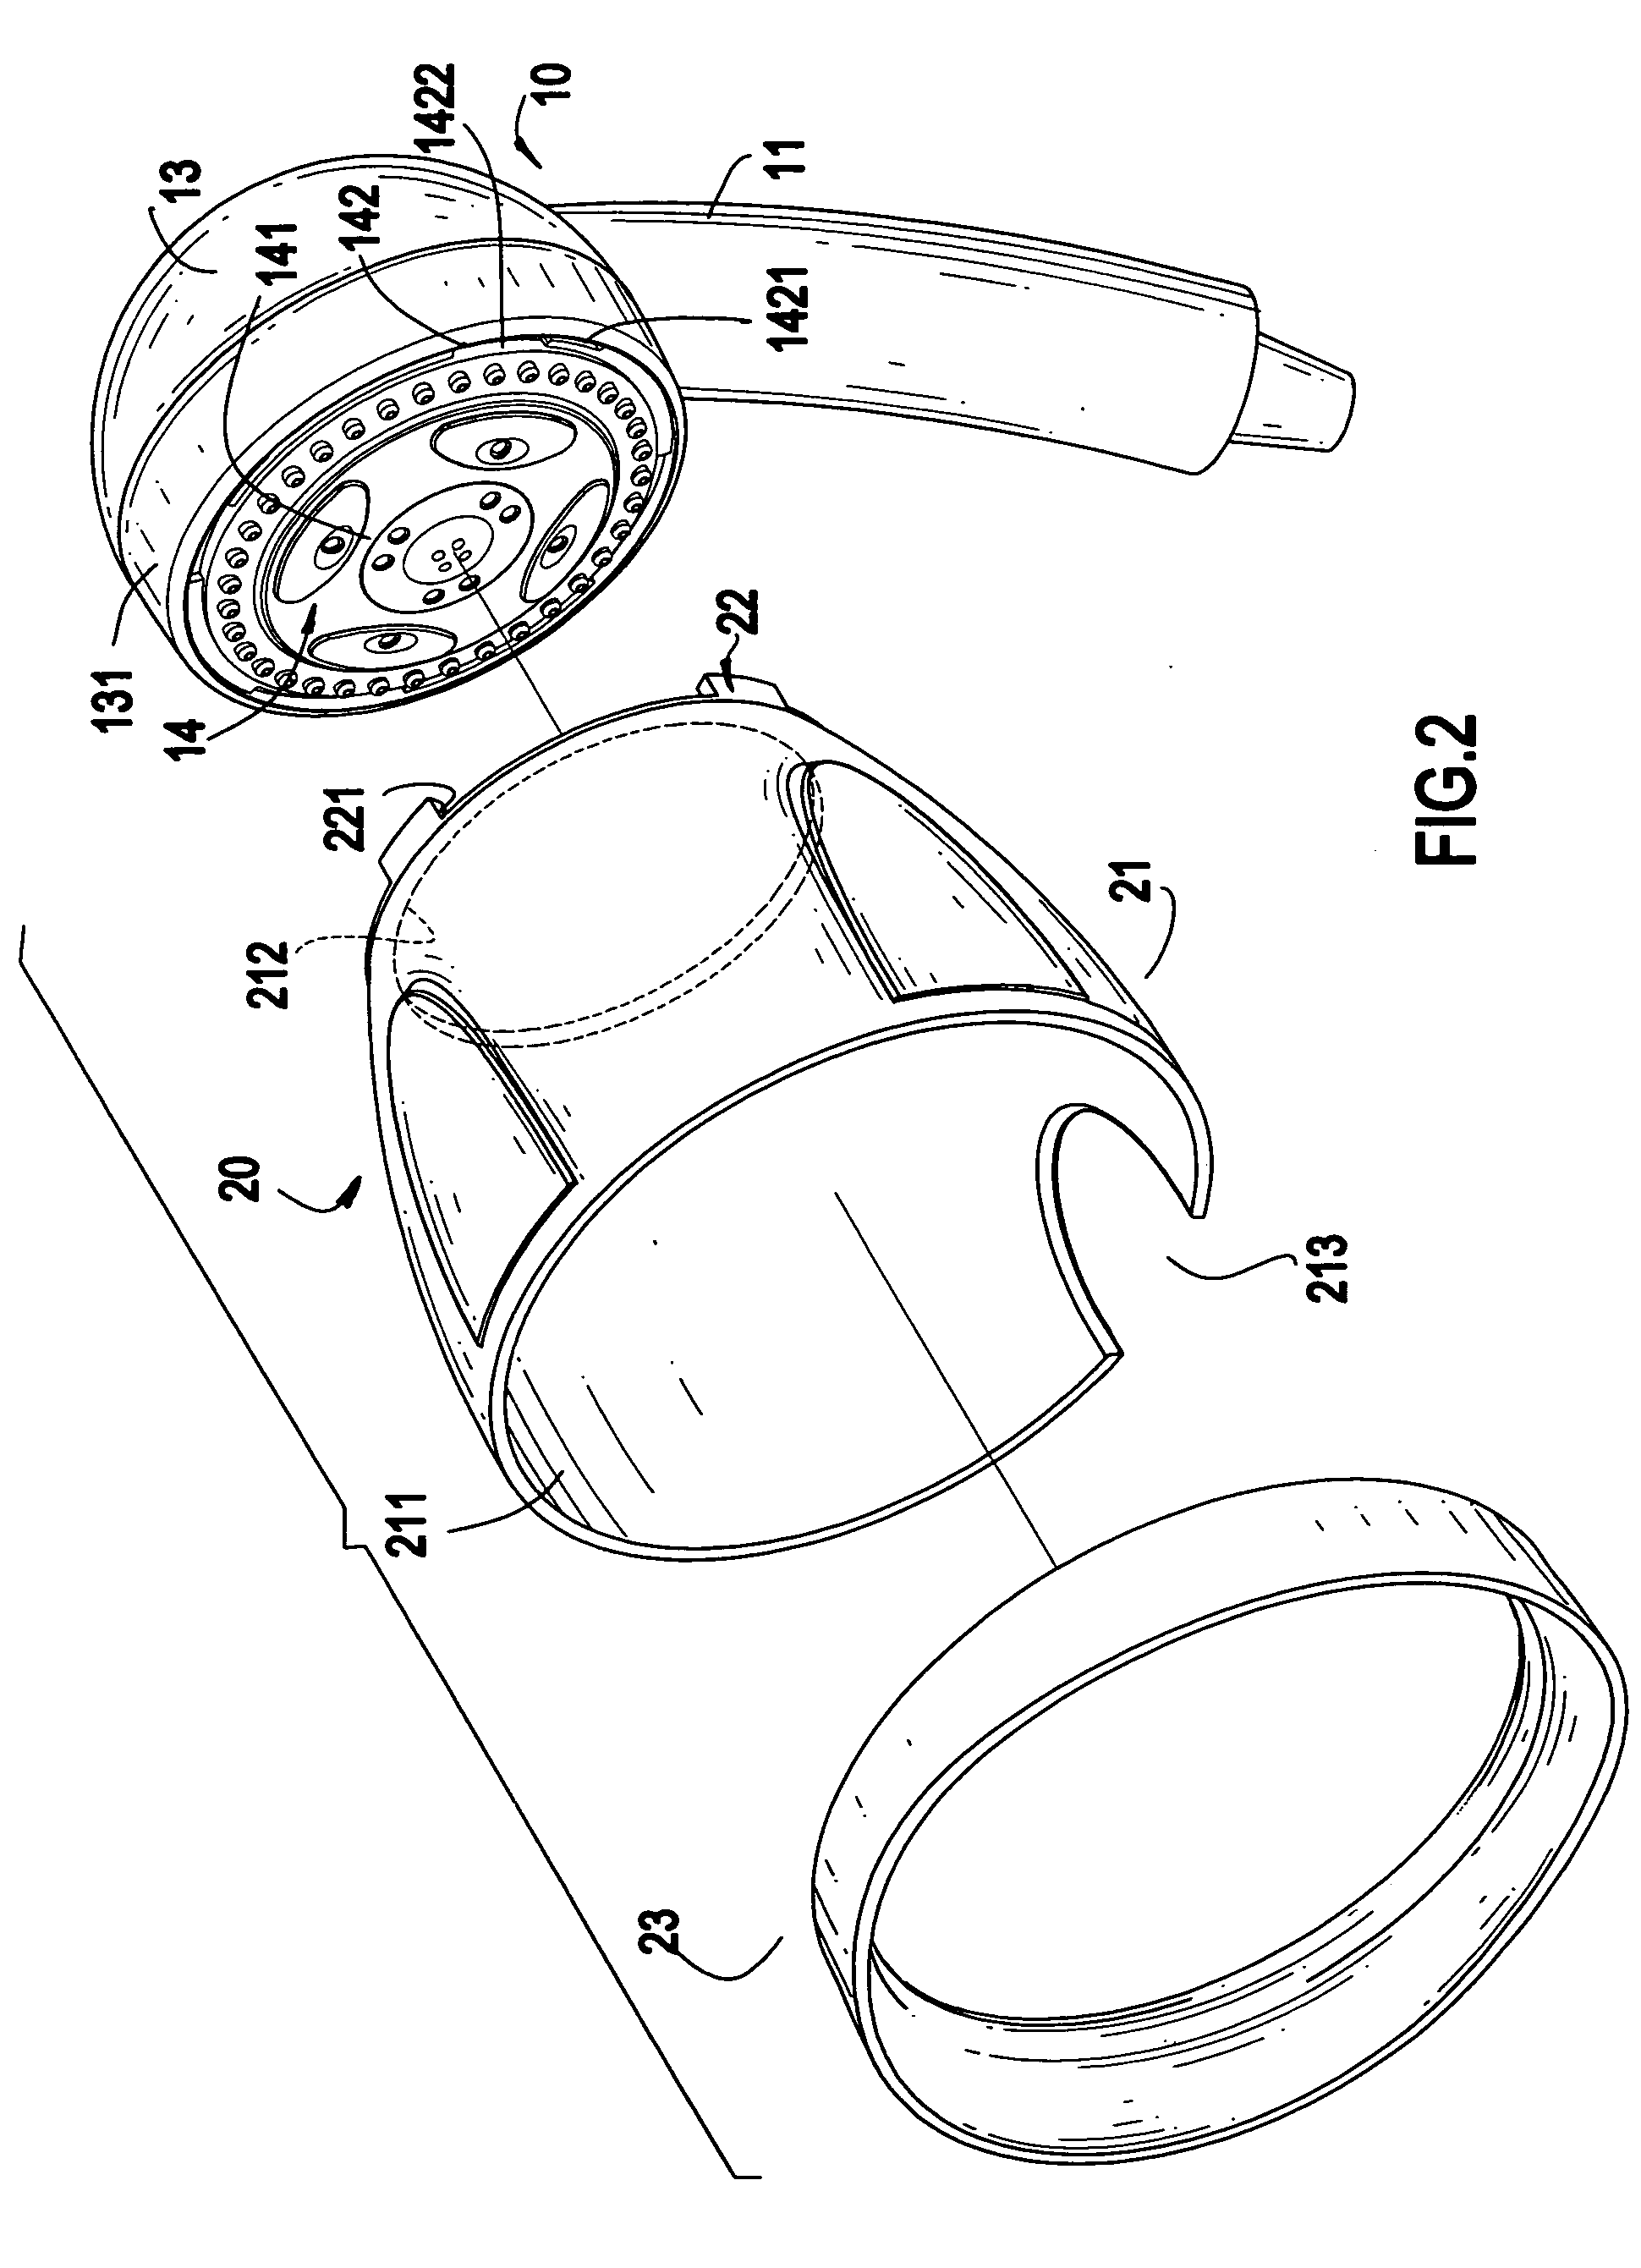 Showerhead assembly